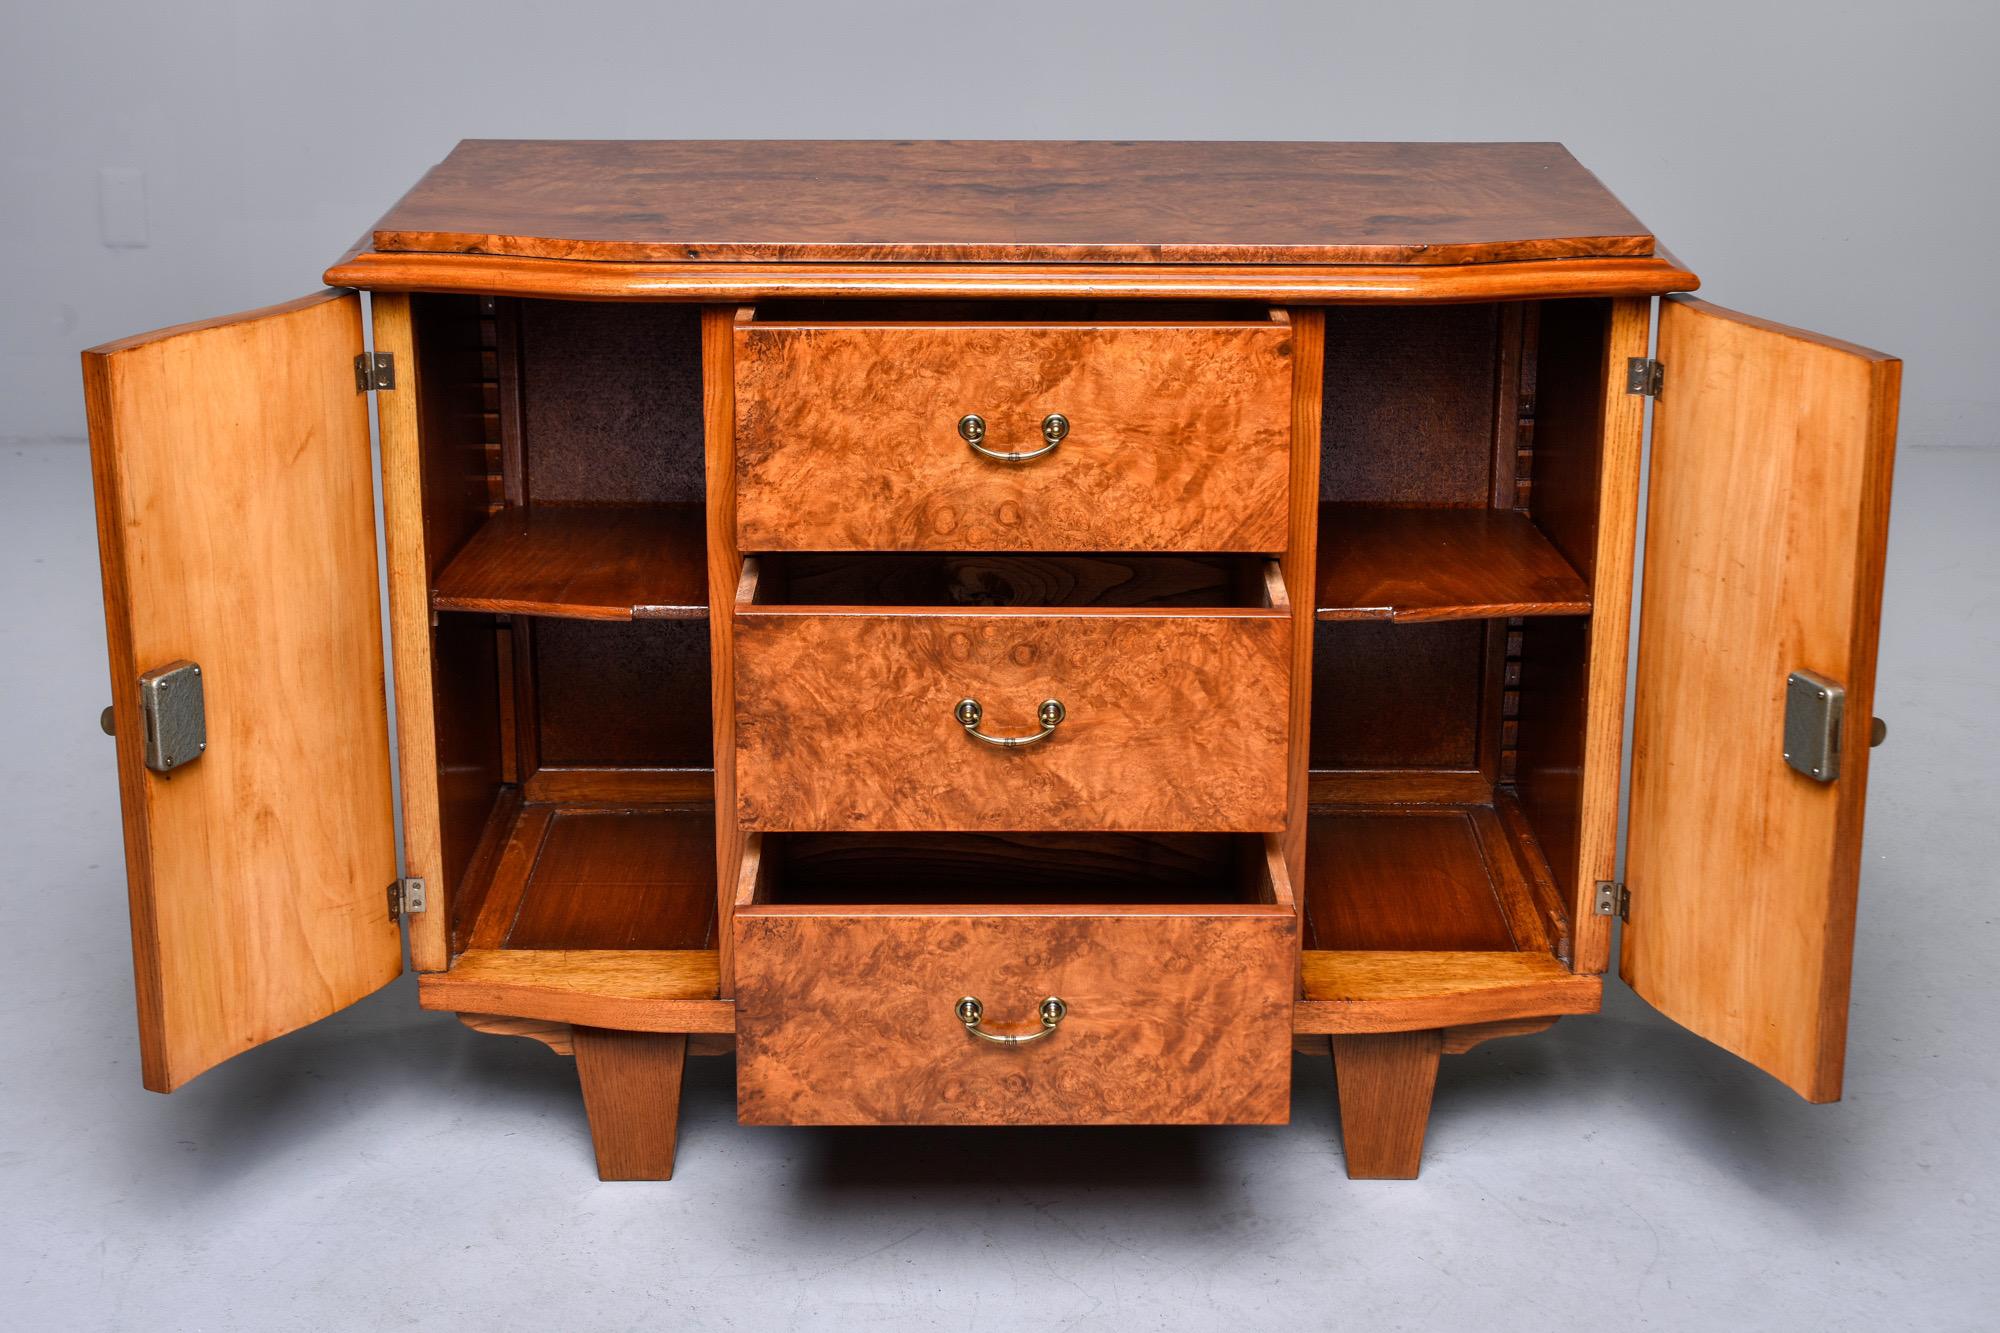 French Deco style commode in walnut veneer features original brass hardware, three center drawers flanked by side cabinets with one internal shelf on each side, circa 1930s. Unknown maker.